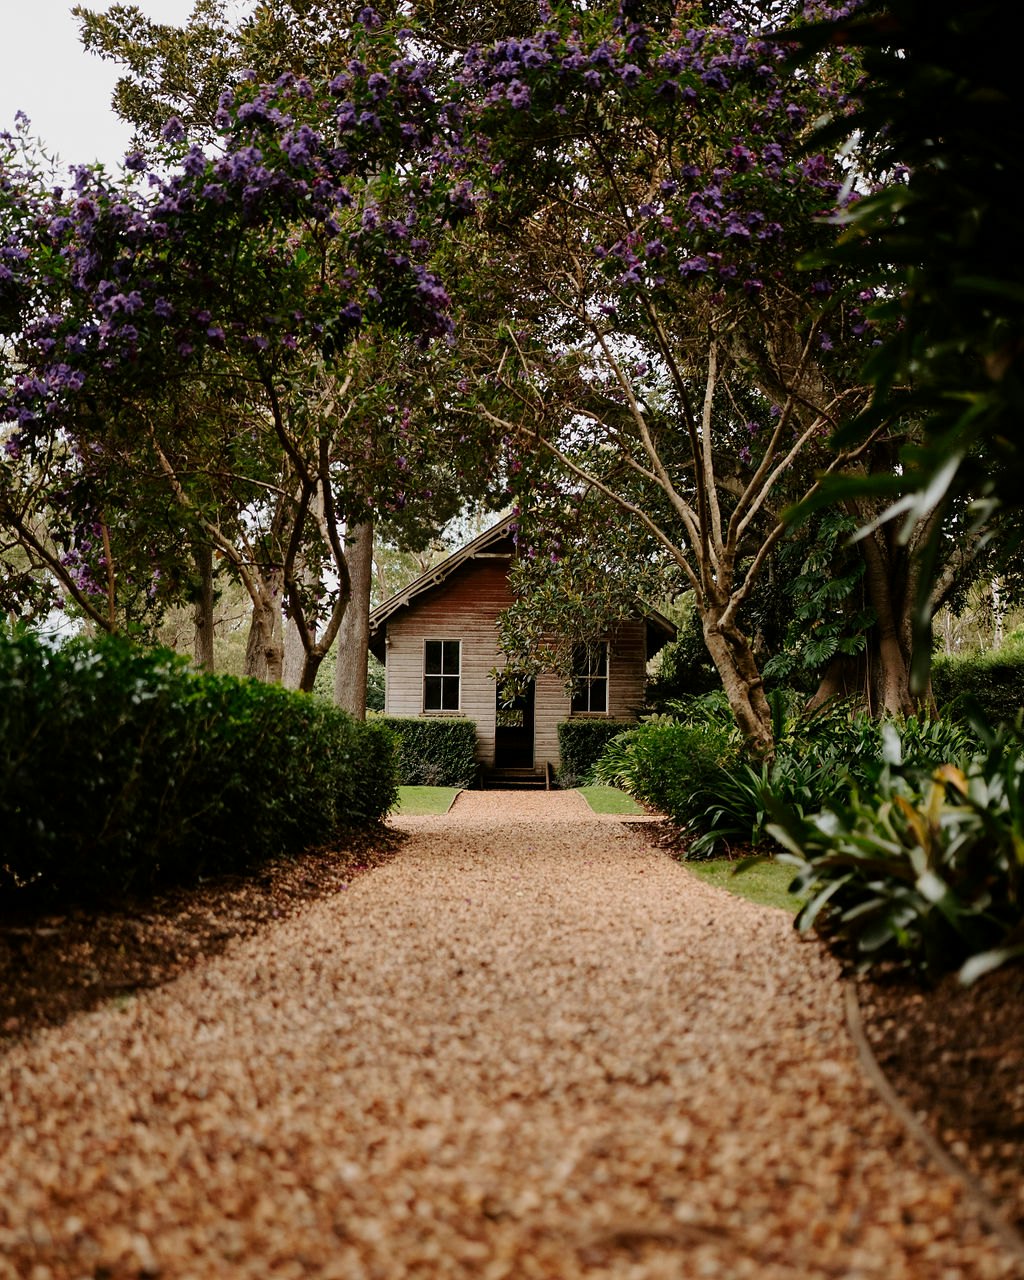 Old School House with purple flowering trees